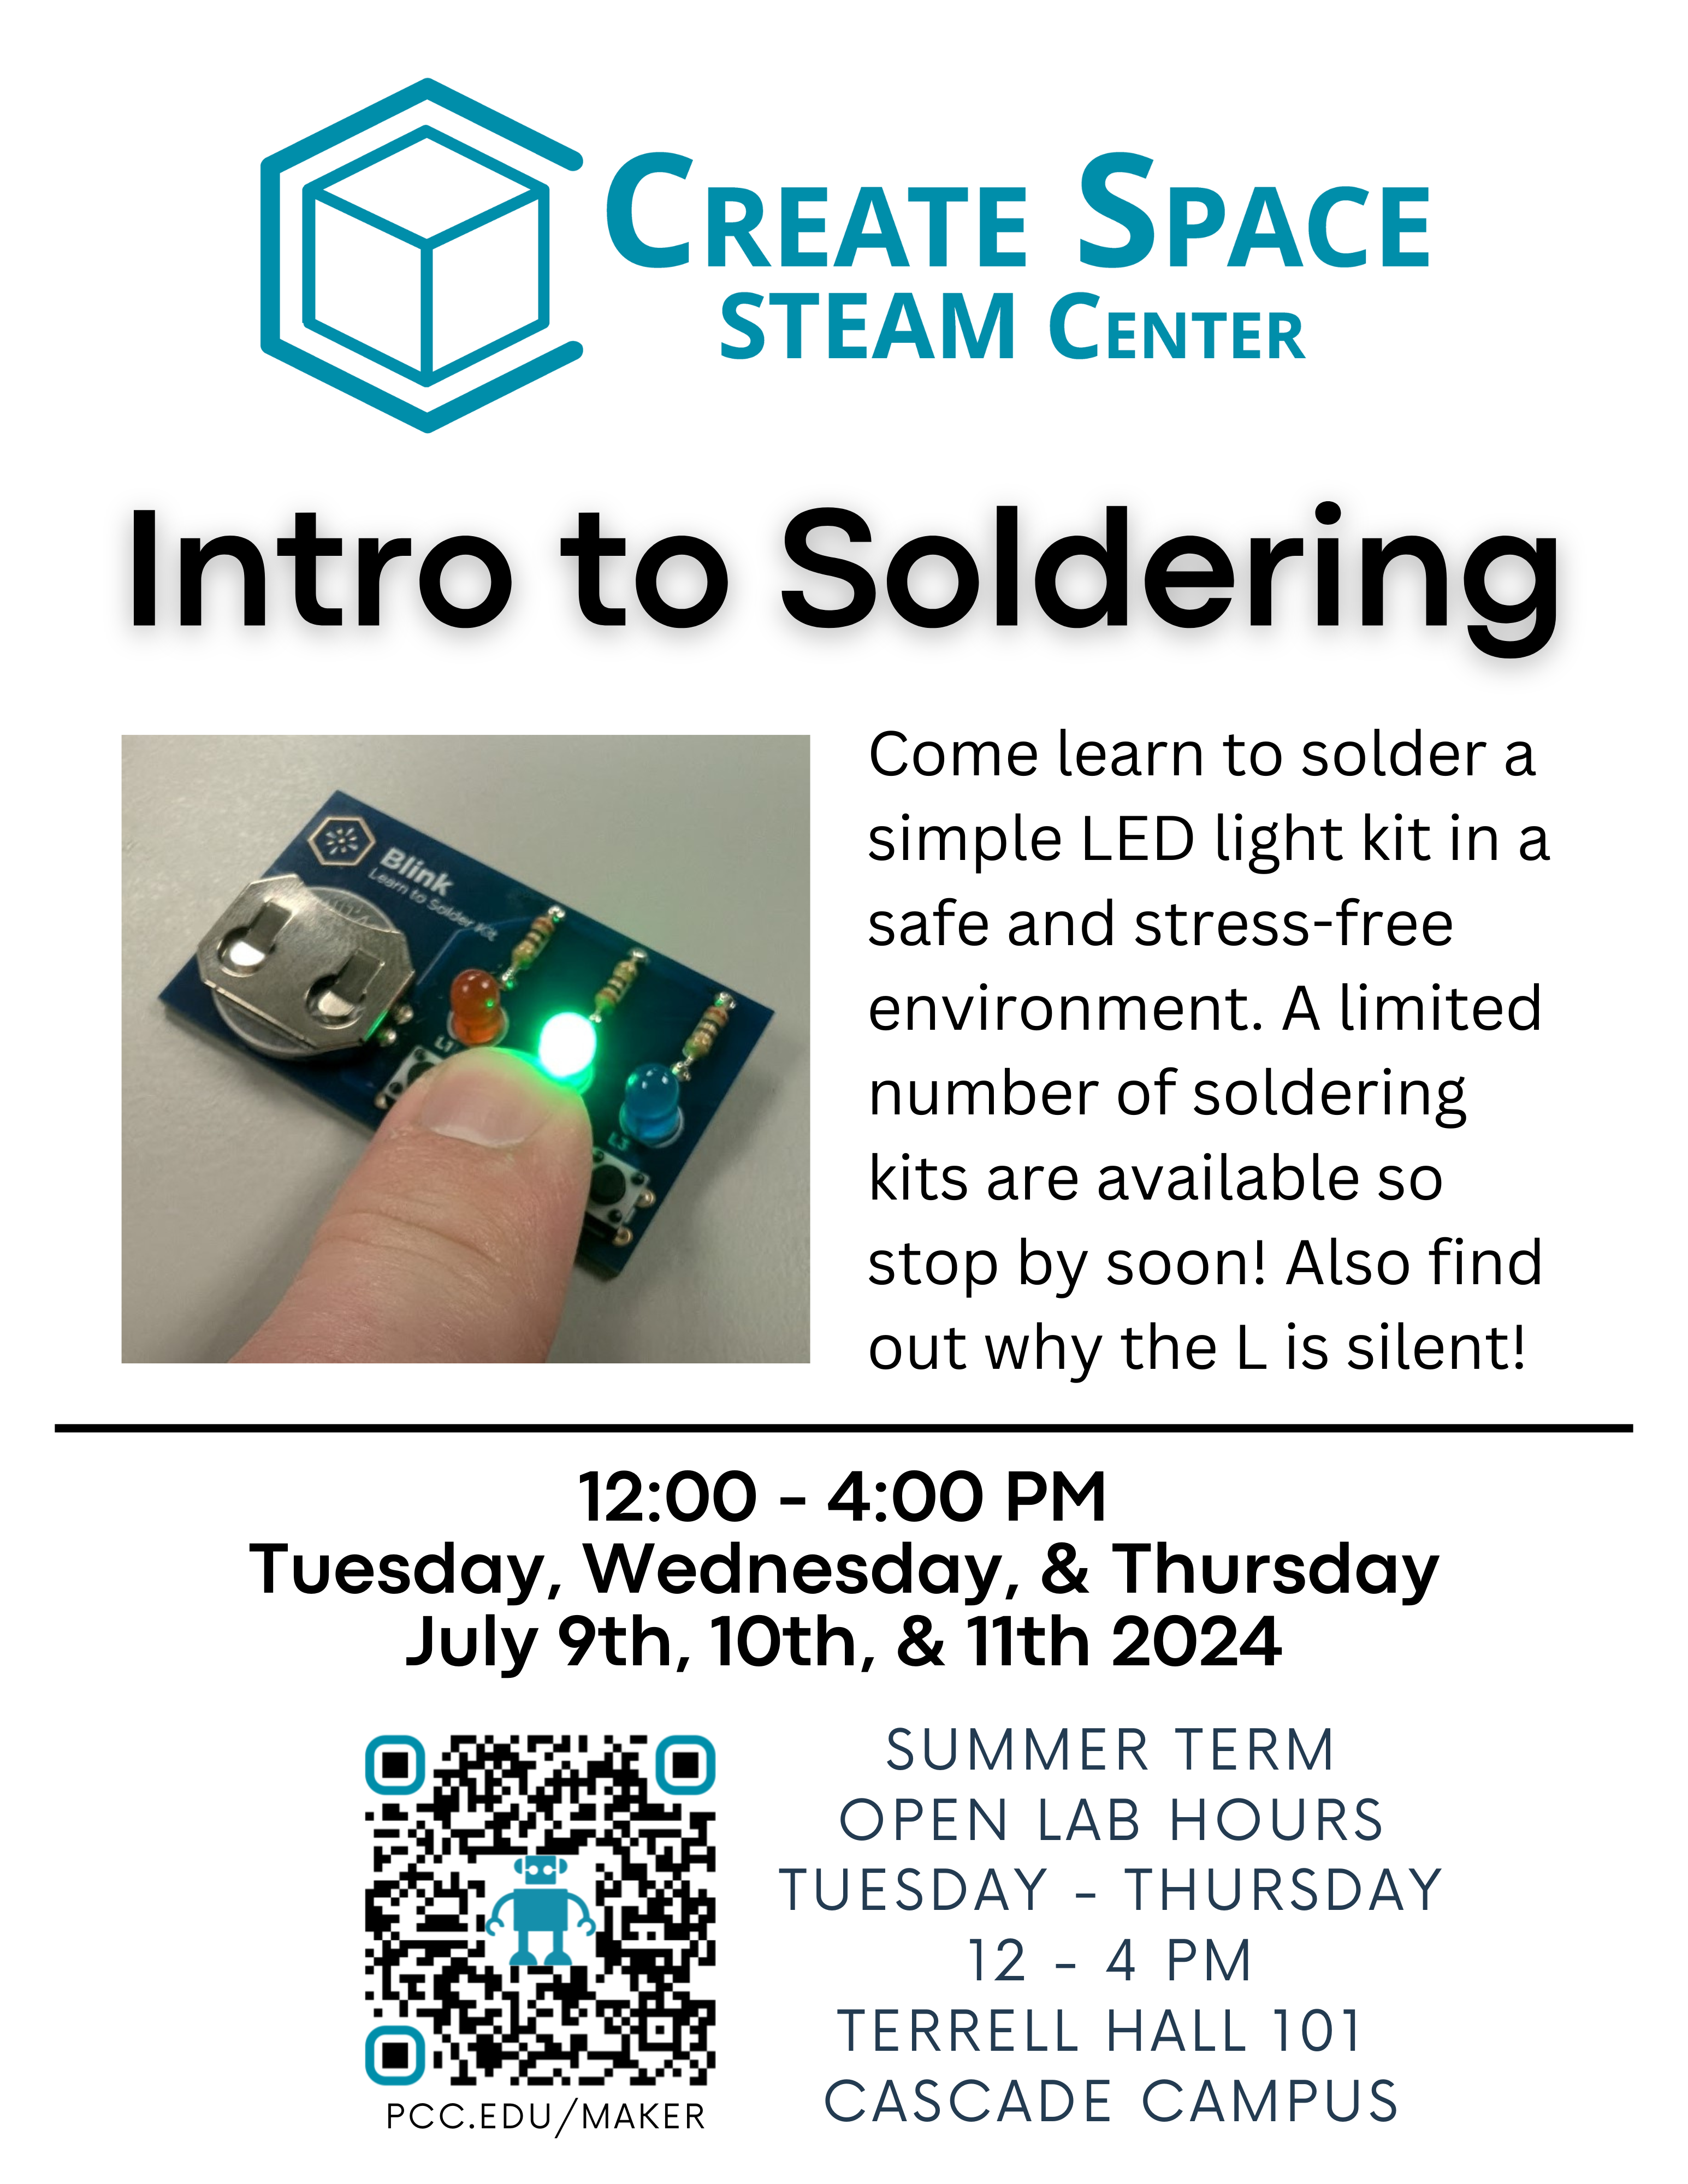 Create Space STEAM Center
Intro to Soldering
Come learn to solder a simple LED light kit in a safe and stress-free environment. A limited number of soldering kits are available so stop by soon! Also find out why the L is silent!
12:00 - 4:00 PM
Tuesday, Wednesday, & Thursday
July 9th, 10th, & 11th 2024

Summer Term Open Lab Hours
Tuesday - Thursday
12 - 4 PM

Terrell Hall 101 
Cascade Campus
pcc.edu/maker